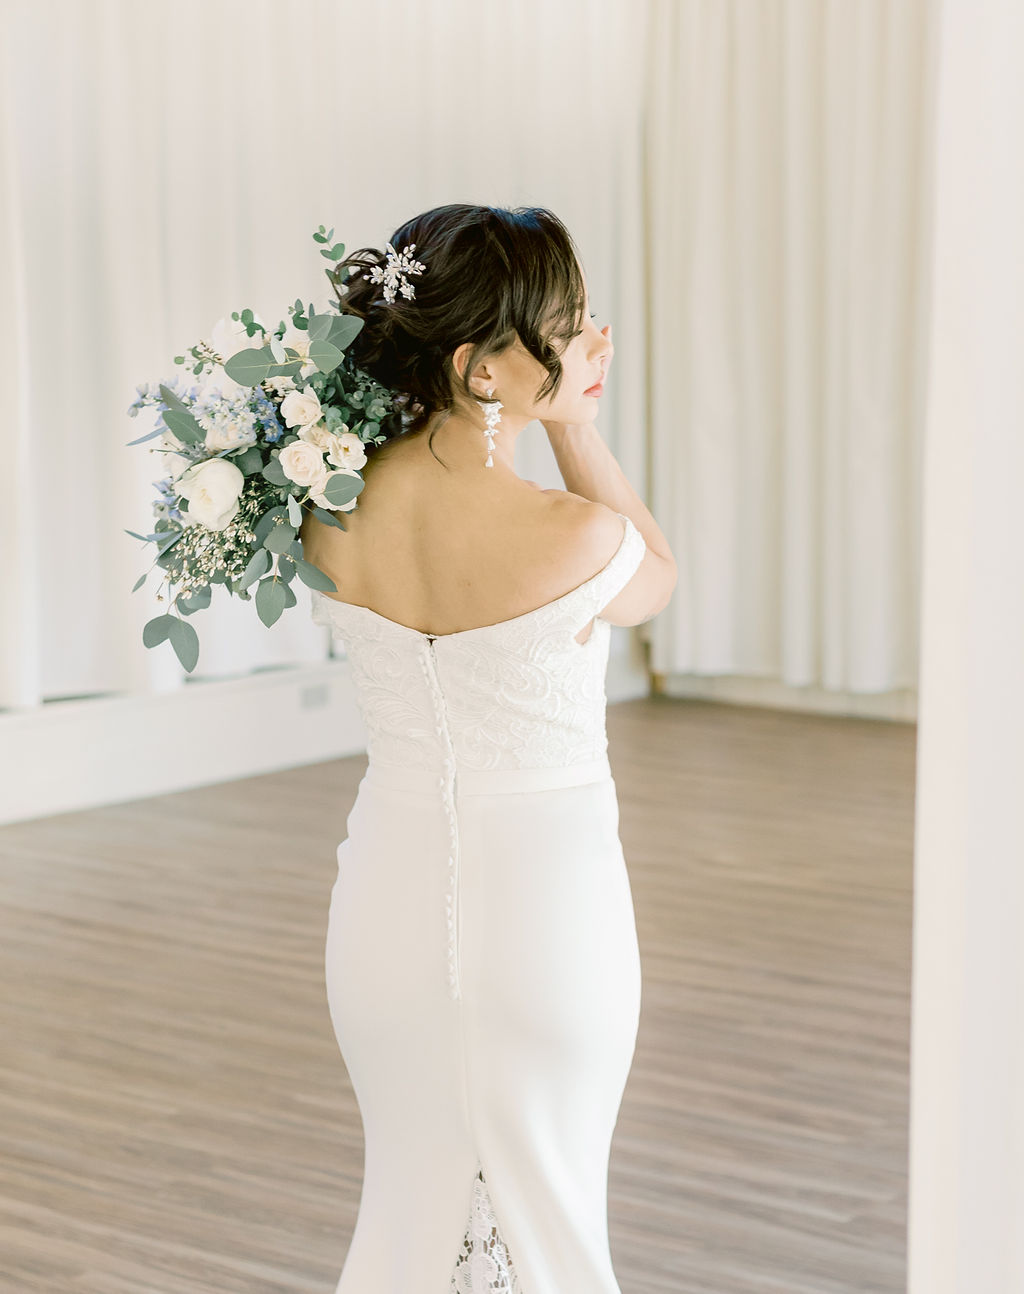 Dark hair bride with low chignon holding light blue and white bouquet over her shoulder wearing a low back wedding dress